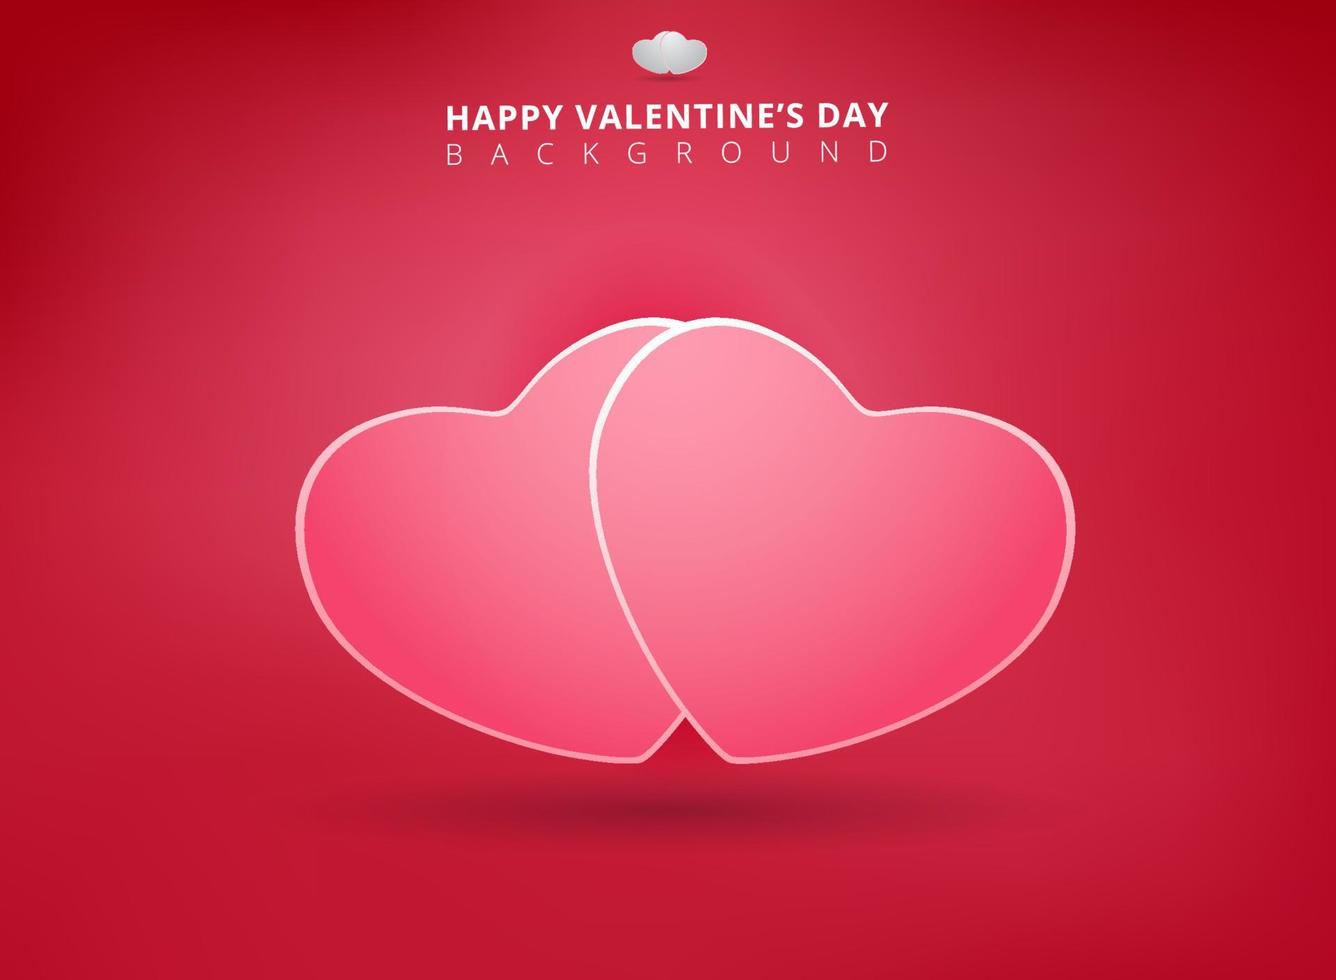 Happy valentines day on pink background with twin hearts. Vector illustration